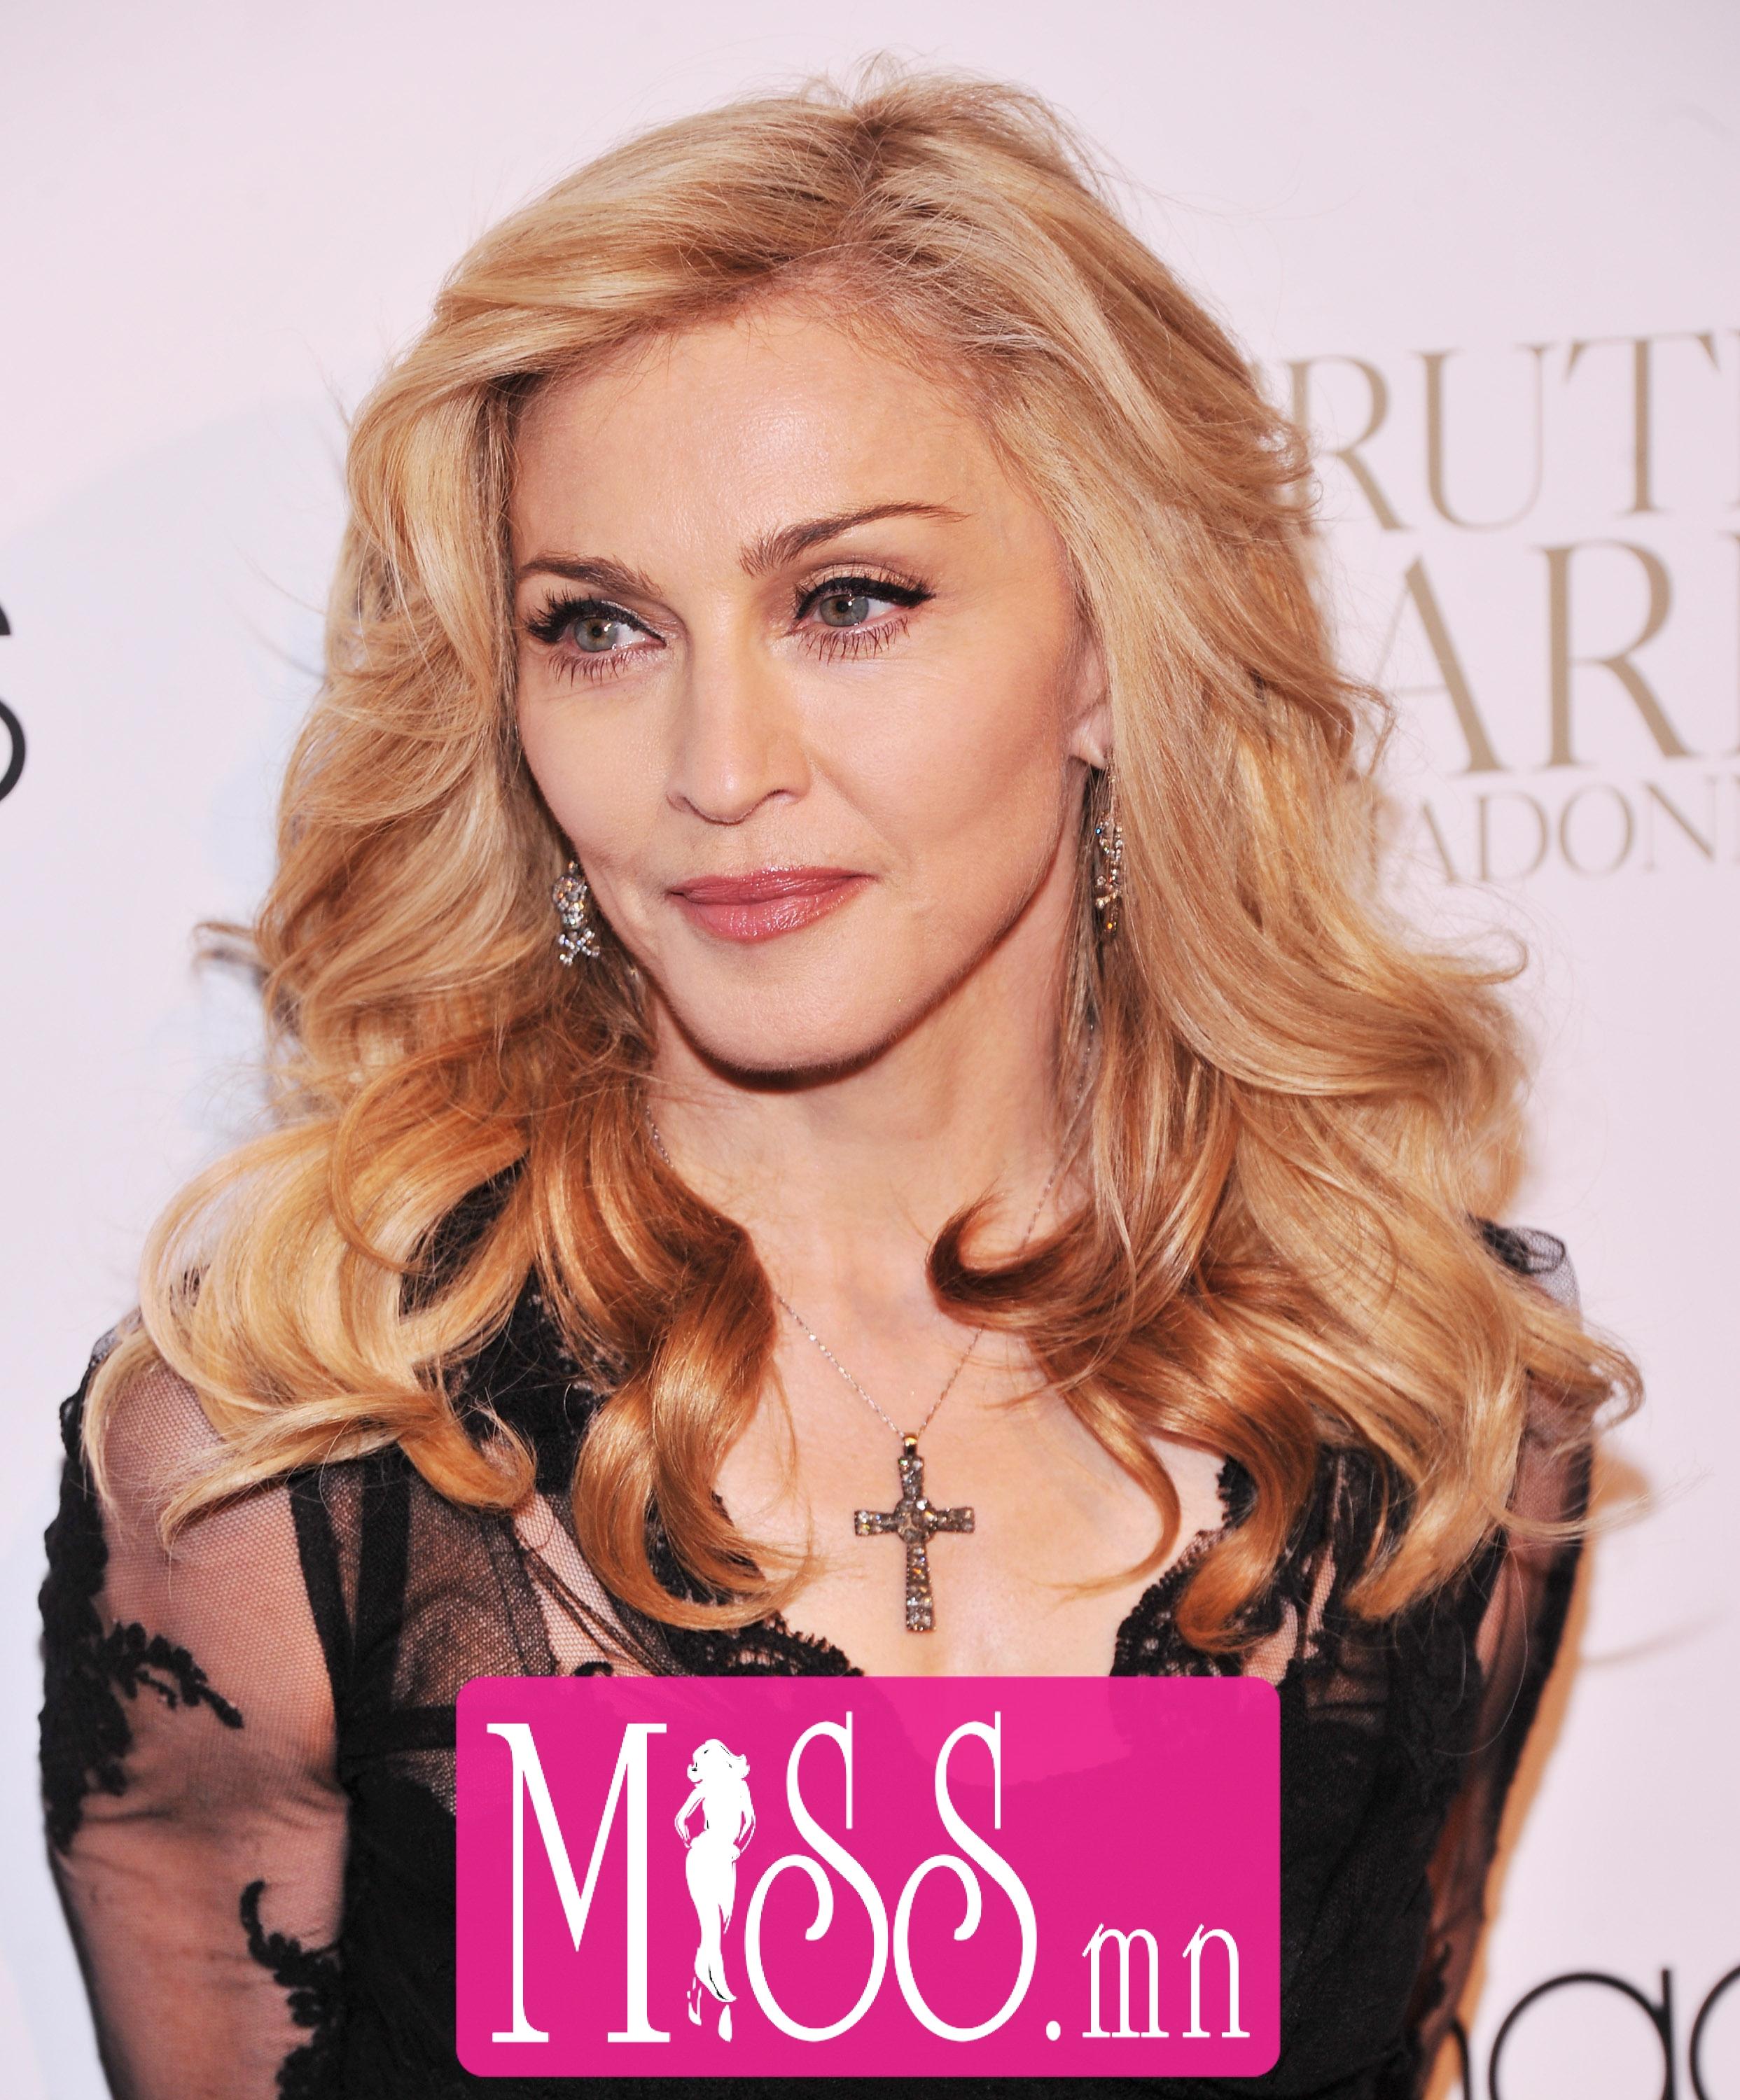 Madonna Launches Her Signature Fragrance "Truth Or Dare" By Madonna